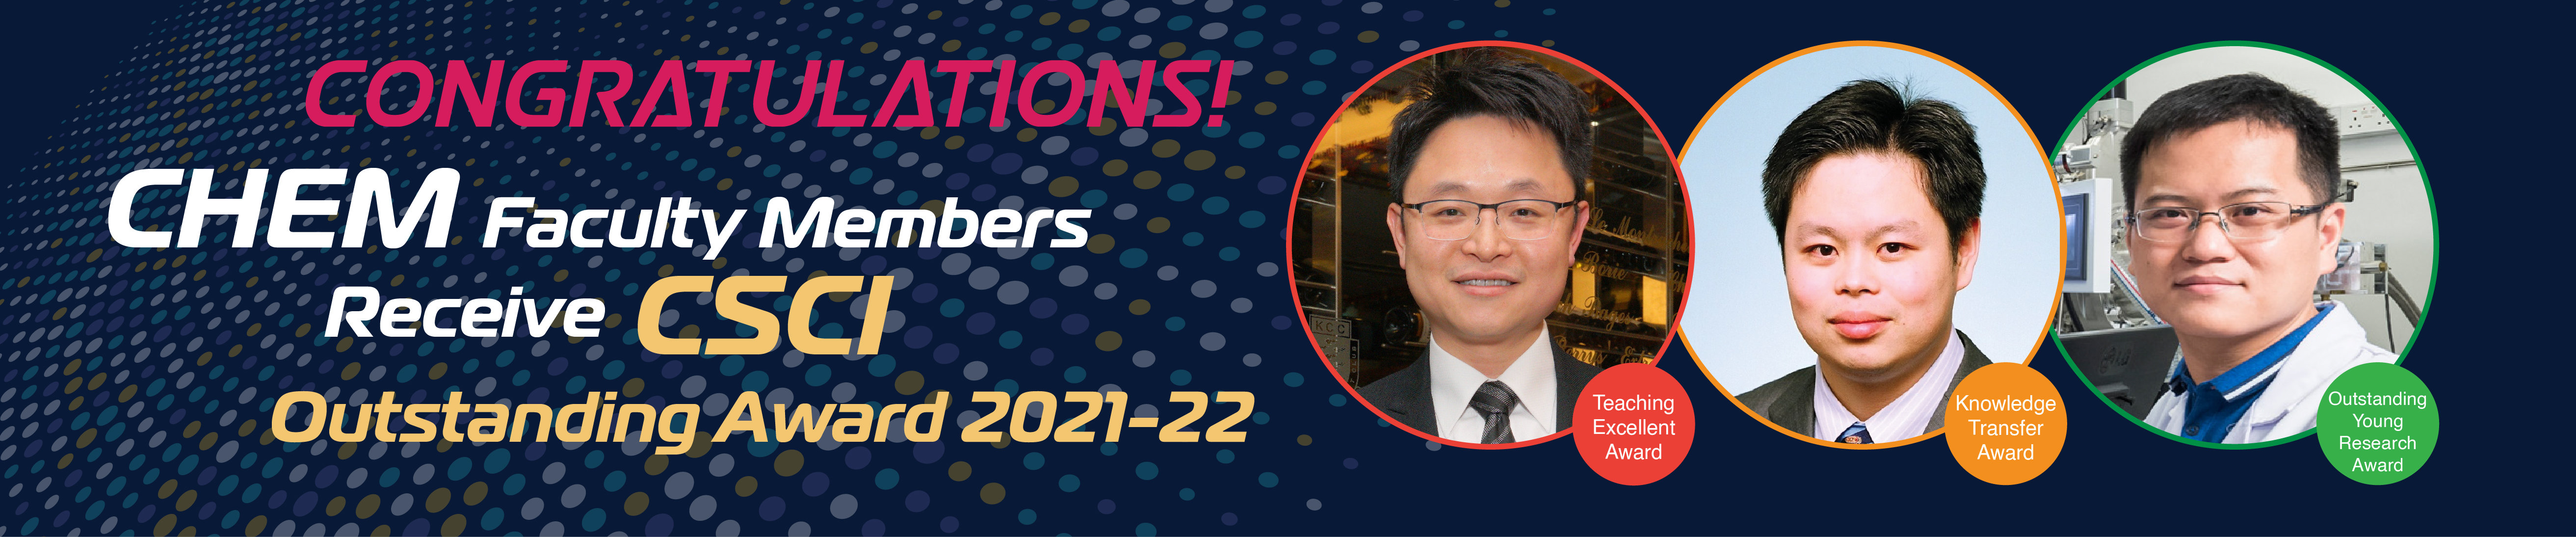 Congratulations to Prof. Kenneth LO, Dr. Vincent KO, and Dr. Zonglong ZHU receive CSCI Outstanding Award 2021-22